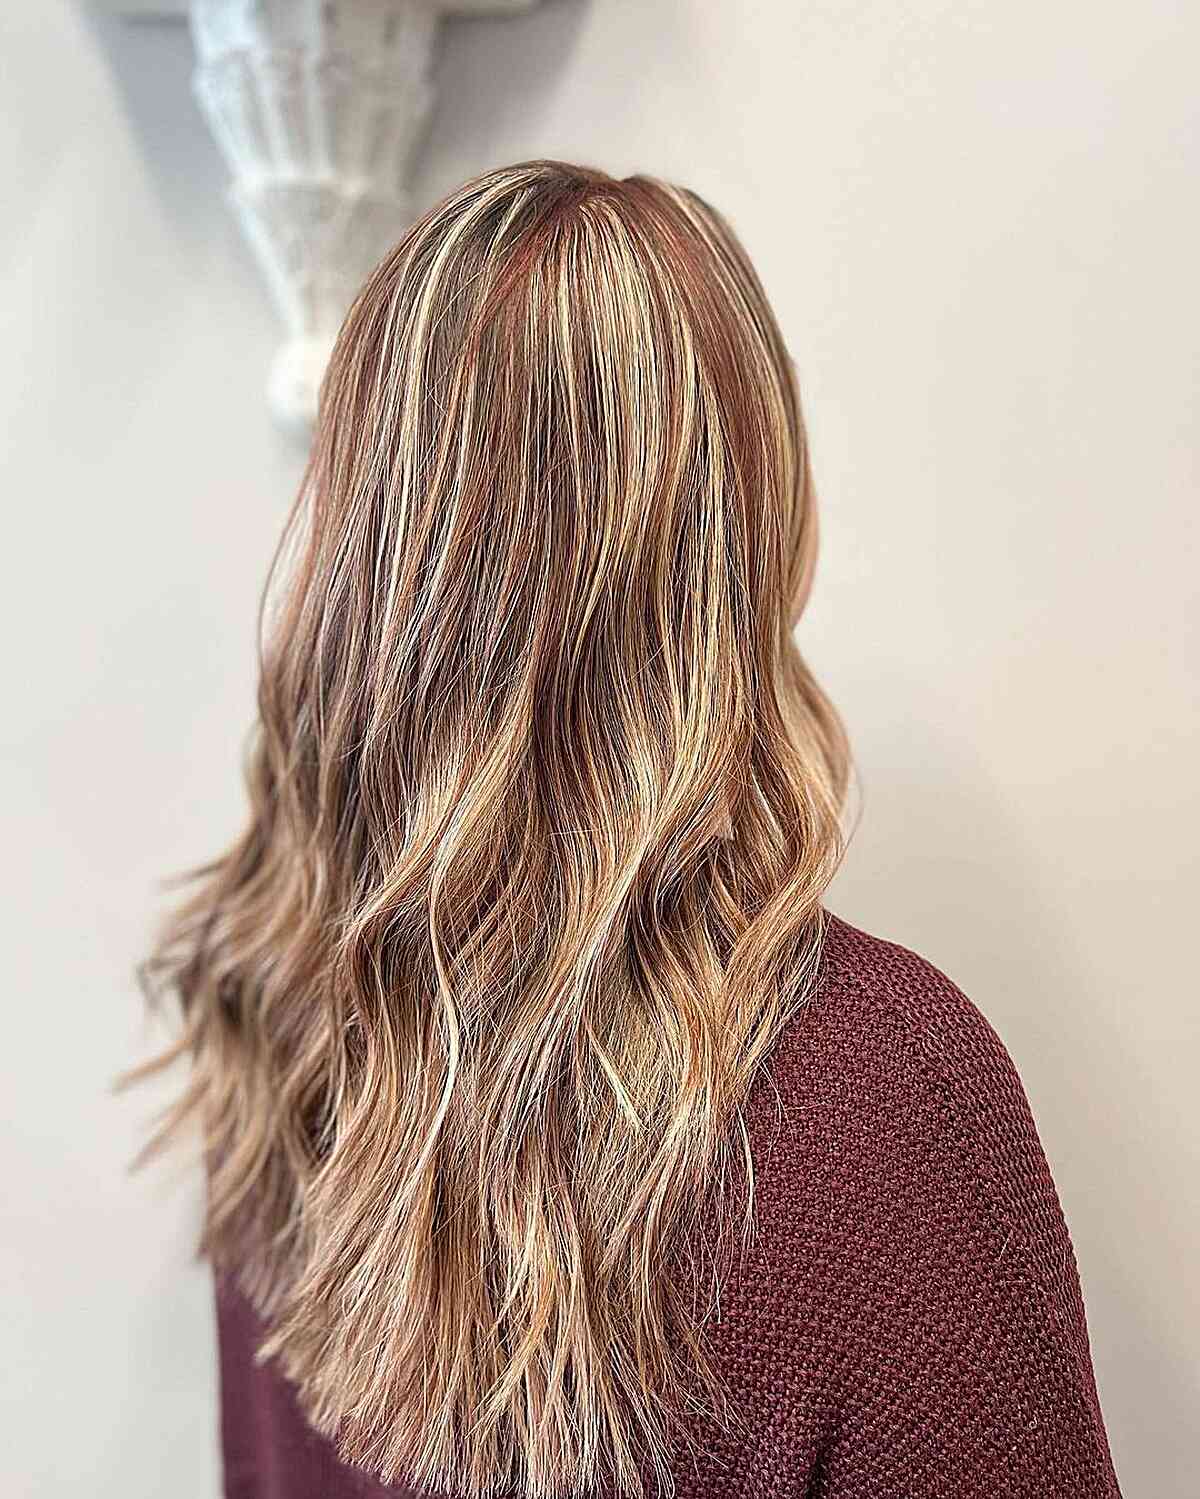 Red highlights on dirty blonde hair